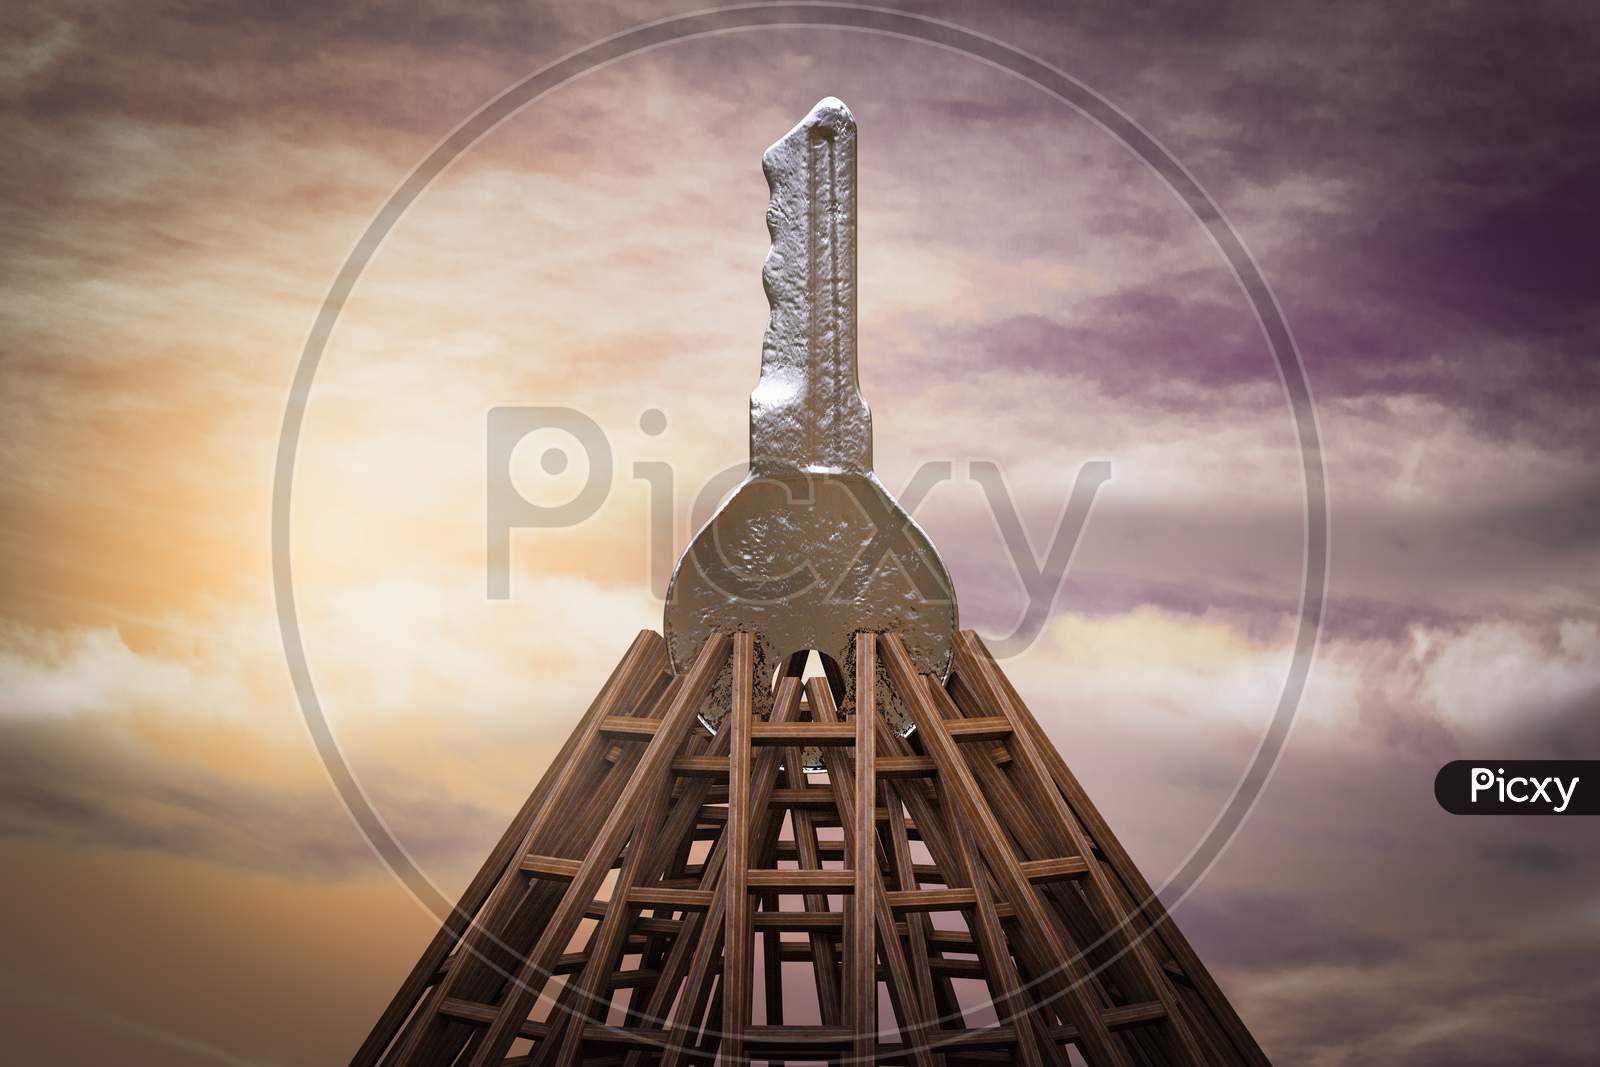 Metal Key On Top Of Many Ladders Together As Pyramid. Real Estate On Top Concept. 3D Illustration